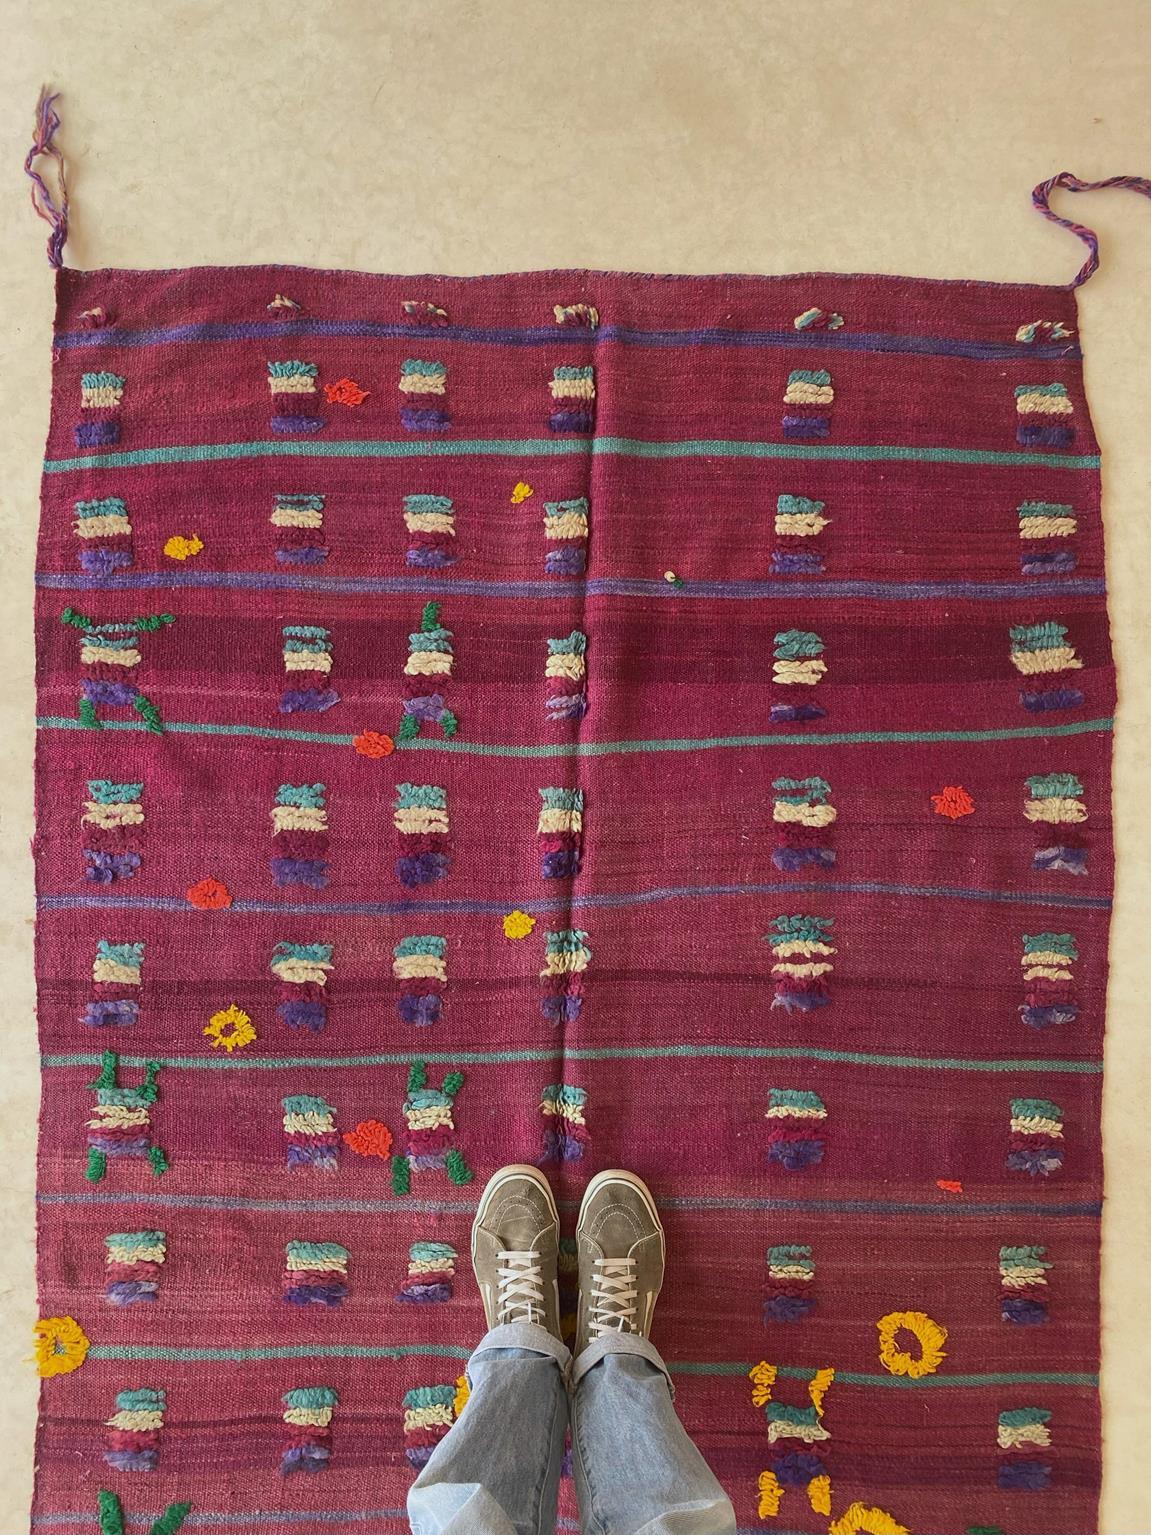 Vintage Moroccan Kilim textile - Purple and yellow - 4.1x8.3feet / 127x252cm For Sale 2